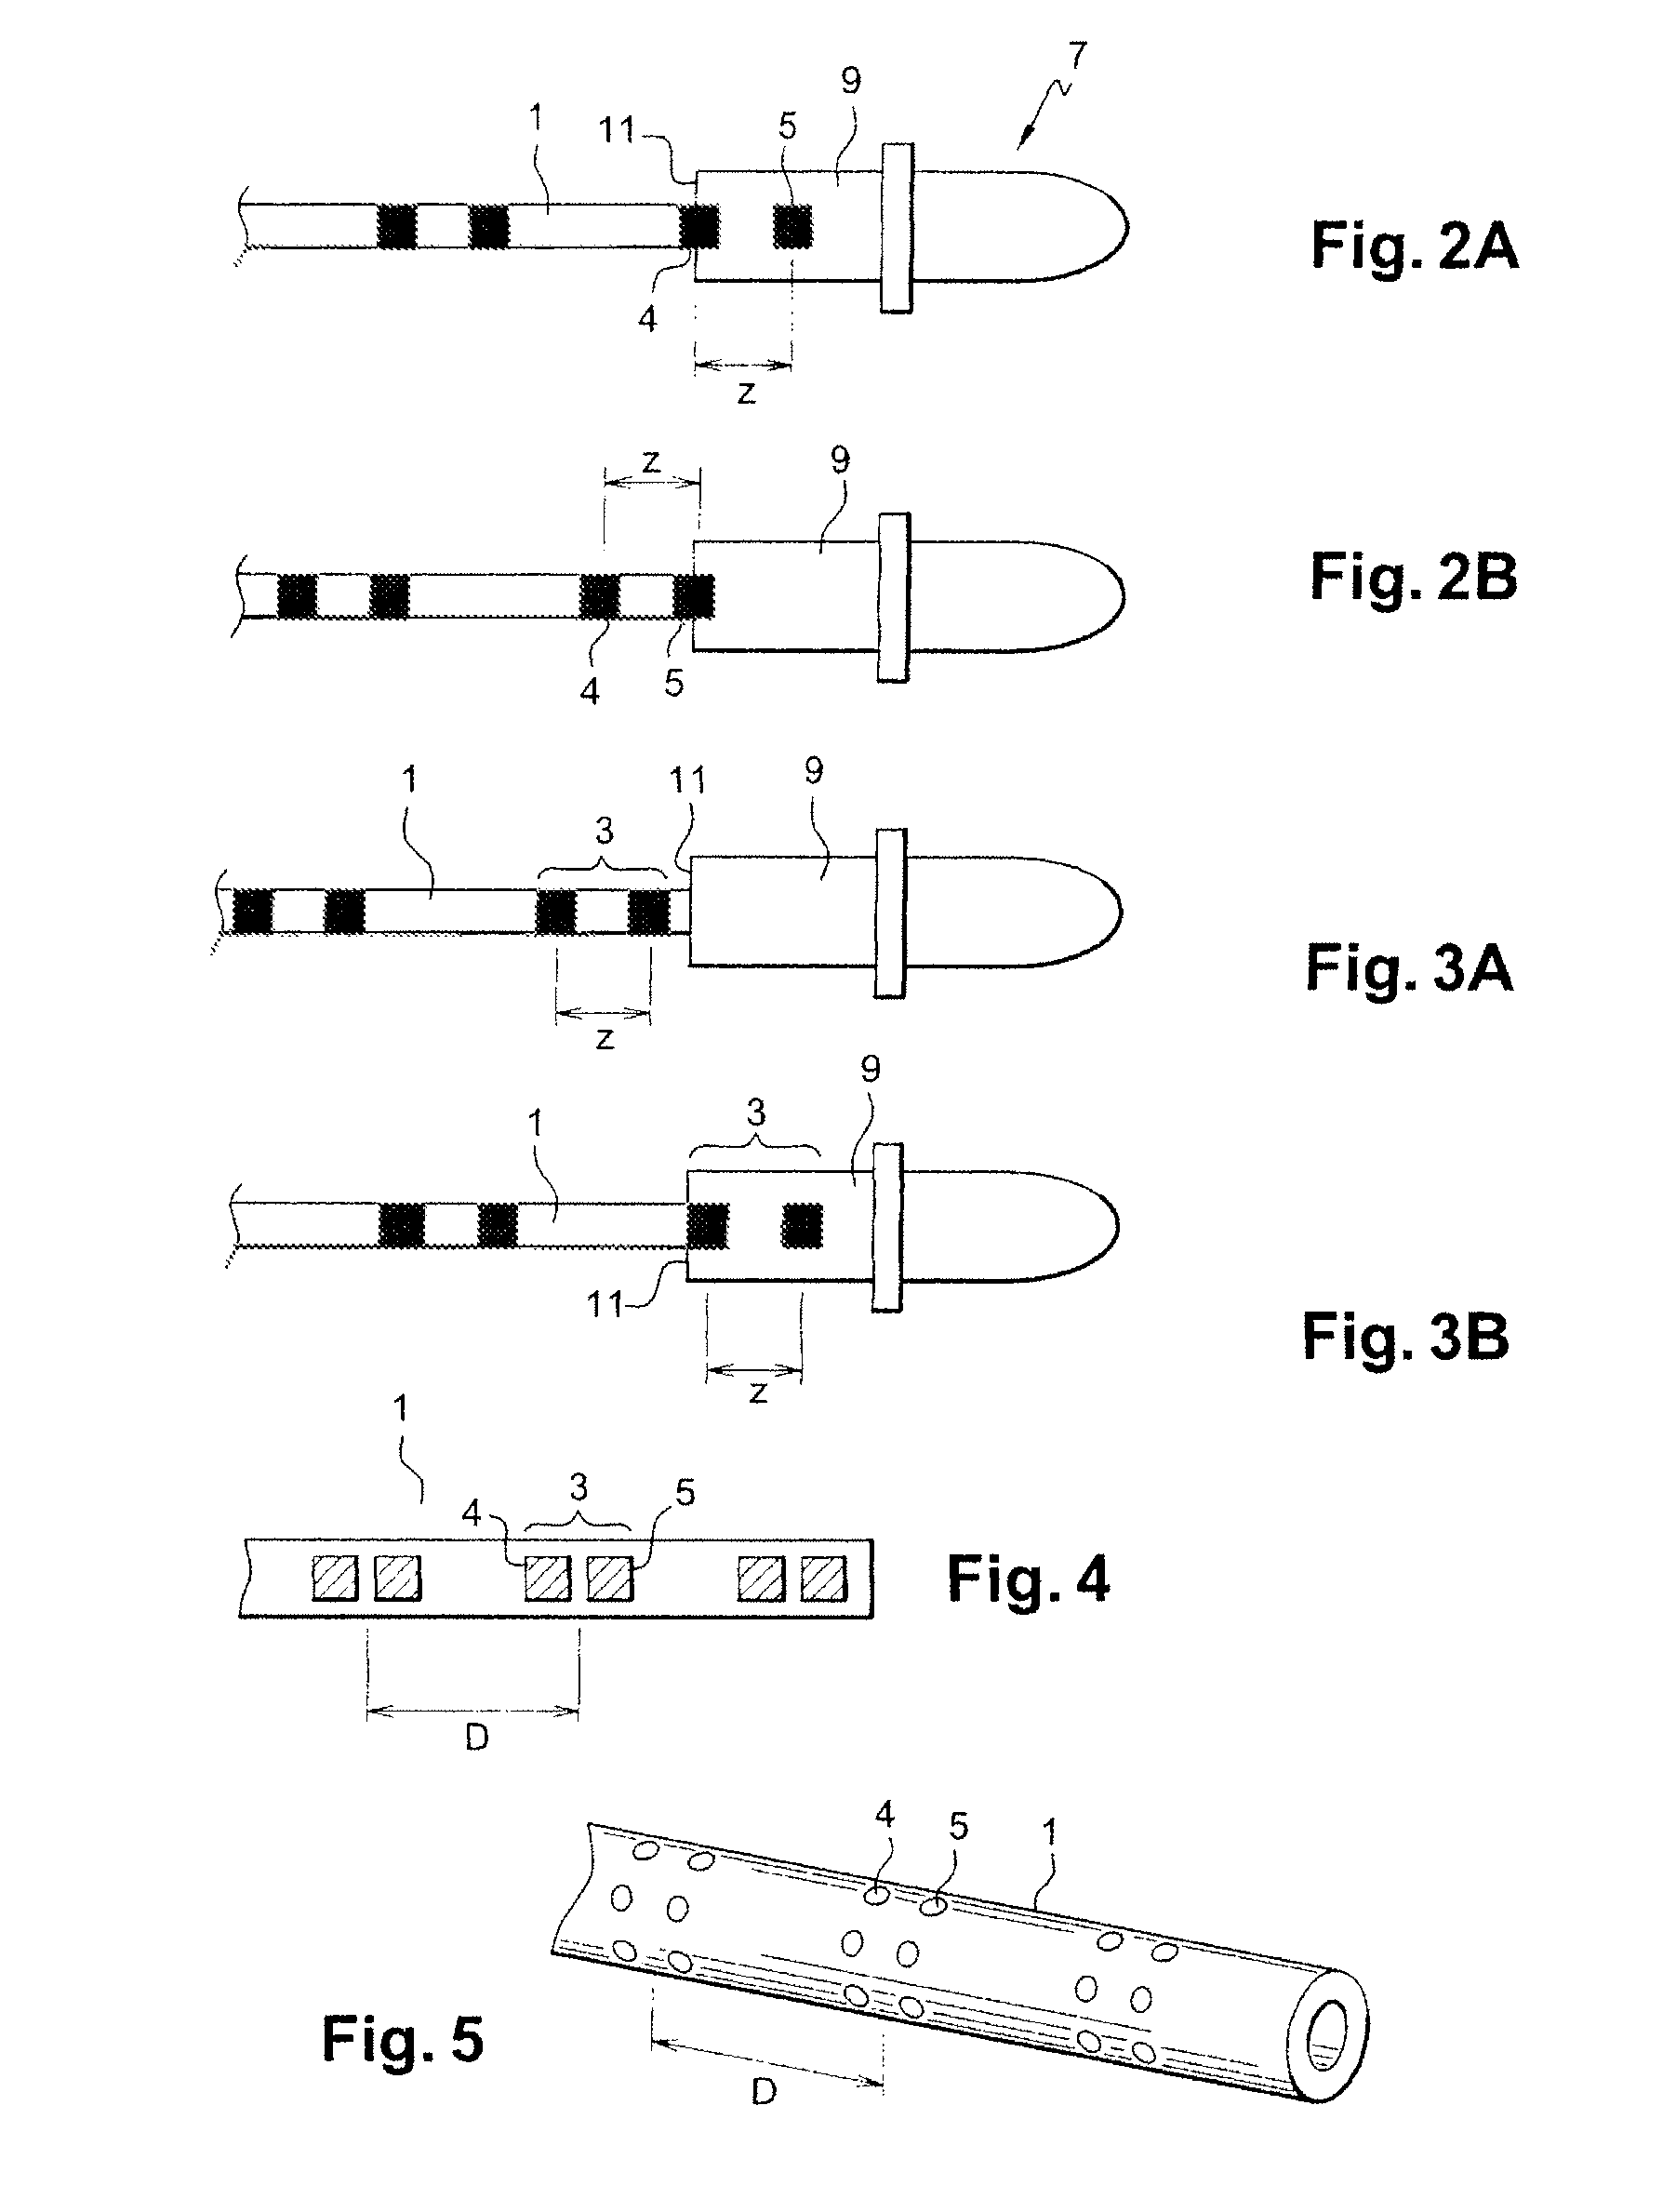 Electrical cable provided with external marking and method of crimping the barrel of a contact onto an electrical cable provided with external marking